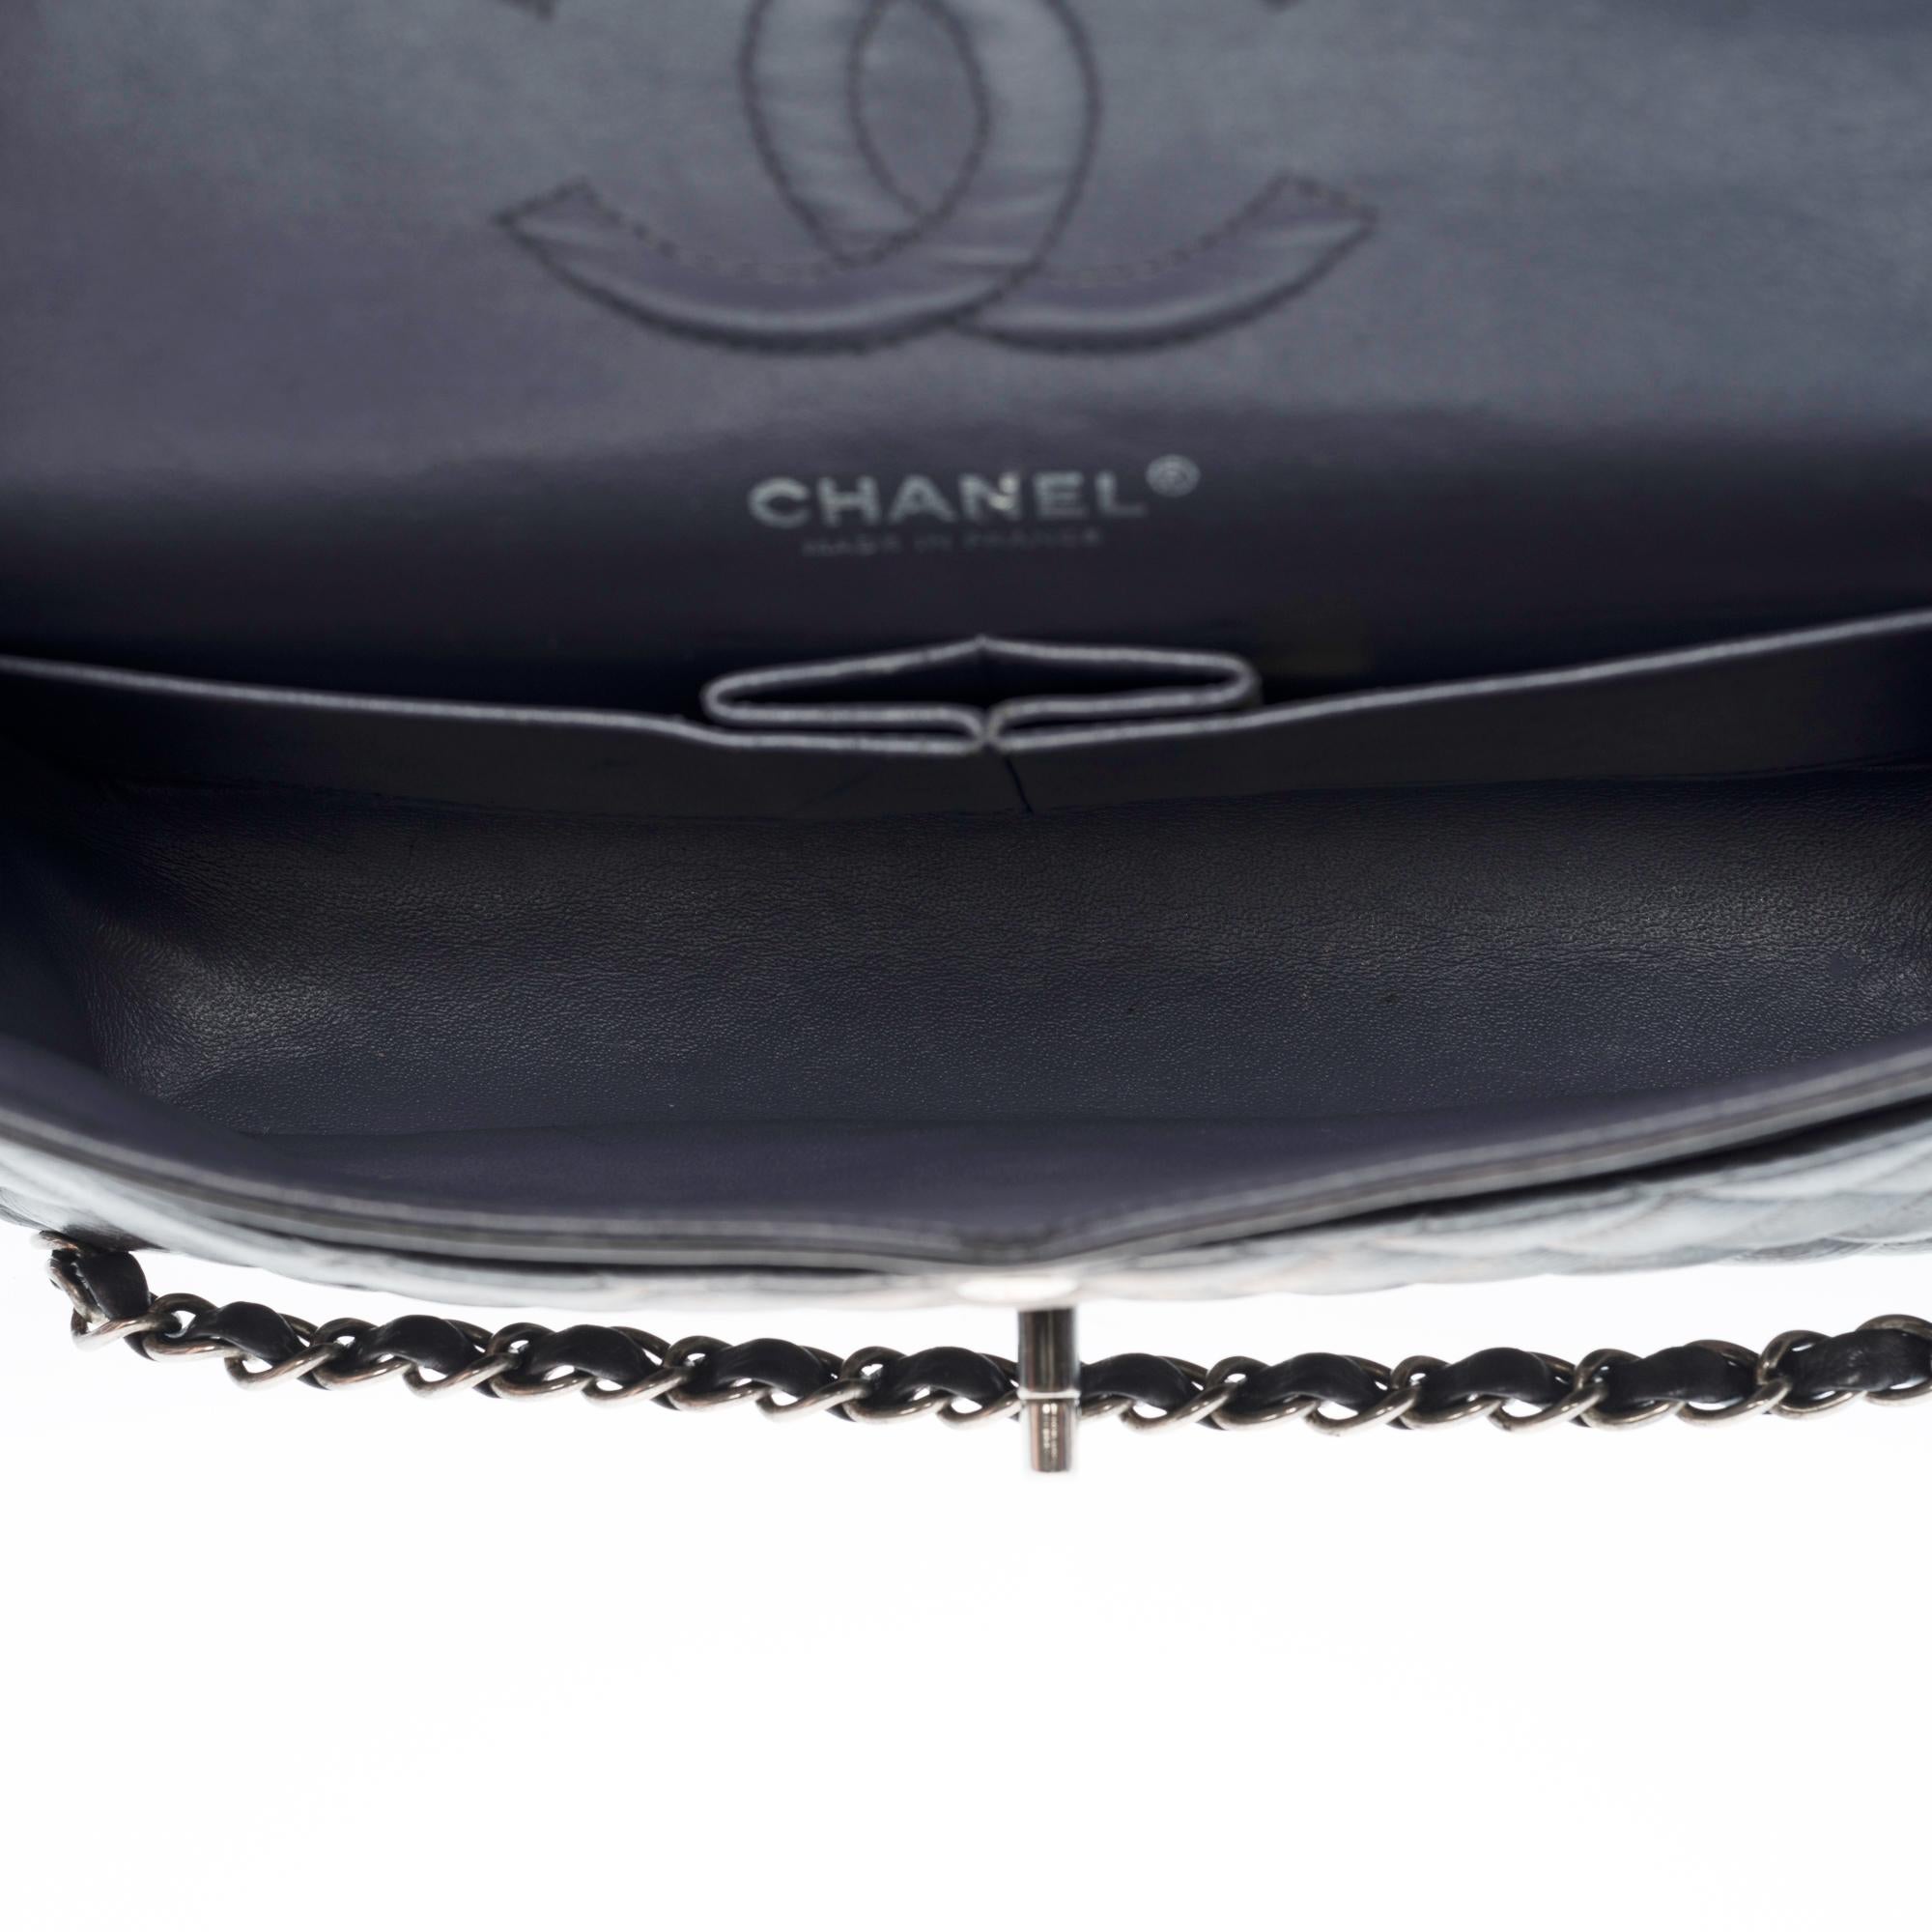 Chanel Timeless medium 25cm limited edition in black leather, SHW 3